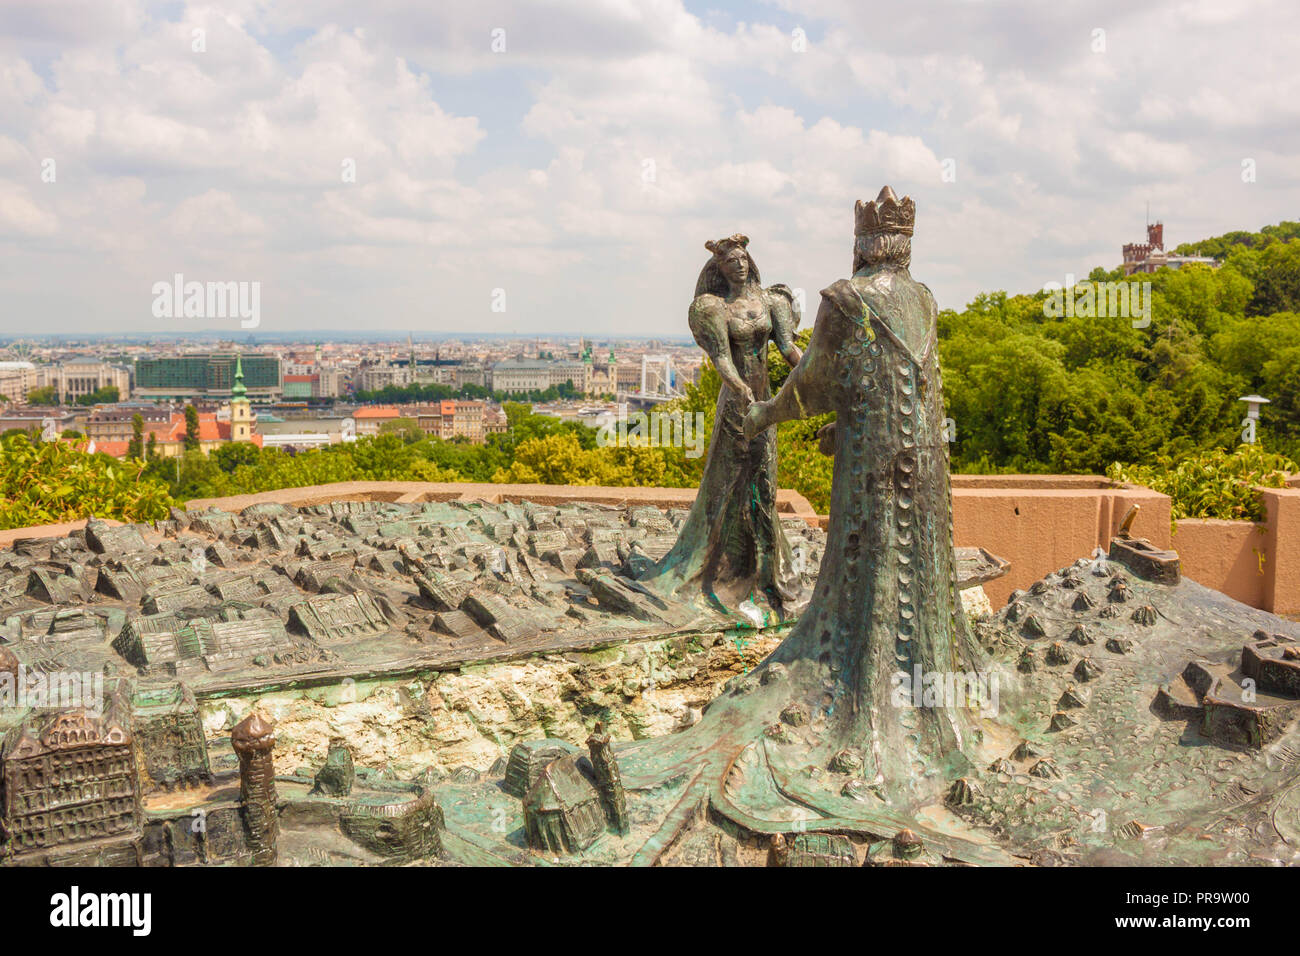 Budapest, Hungary - June 6, 2017: Sculptural composition of prince Buda meeting princess Pest over Danube river. Symbol of unification of Buda and Pes Stock Photo